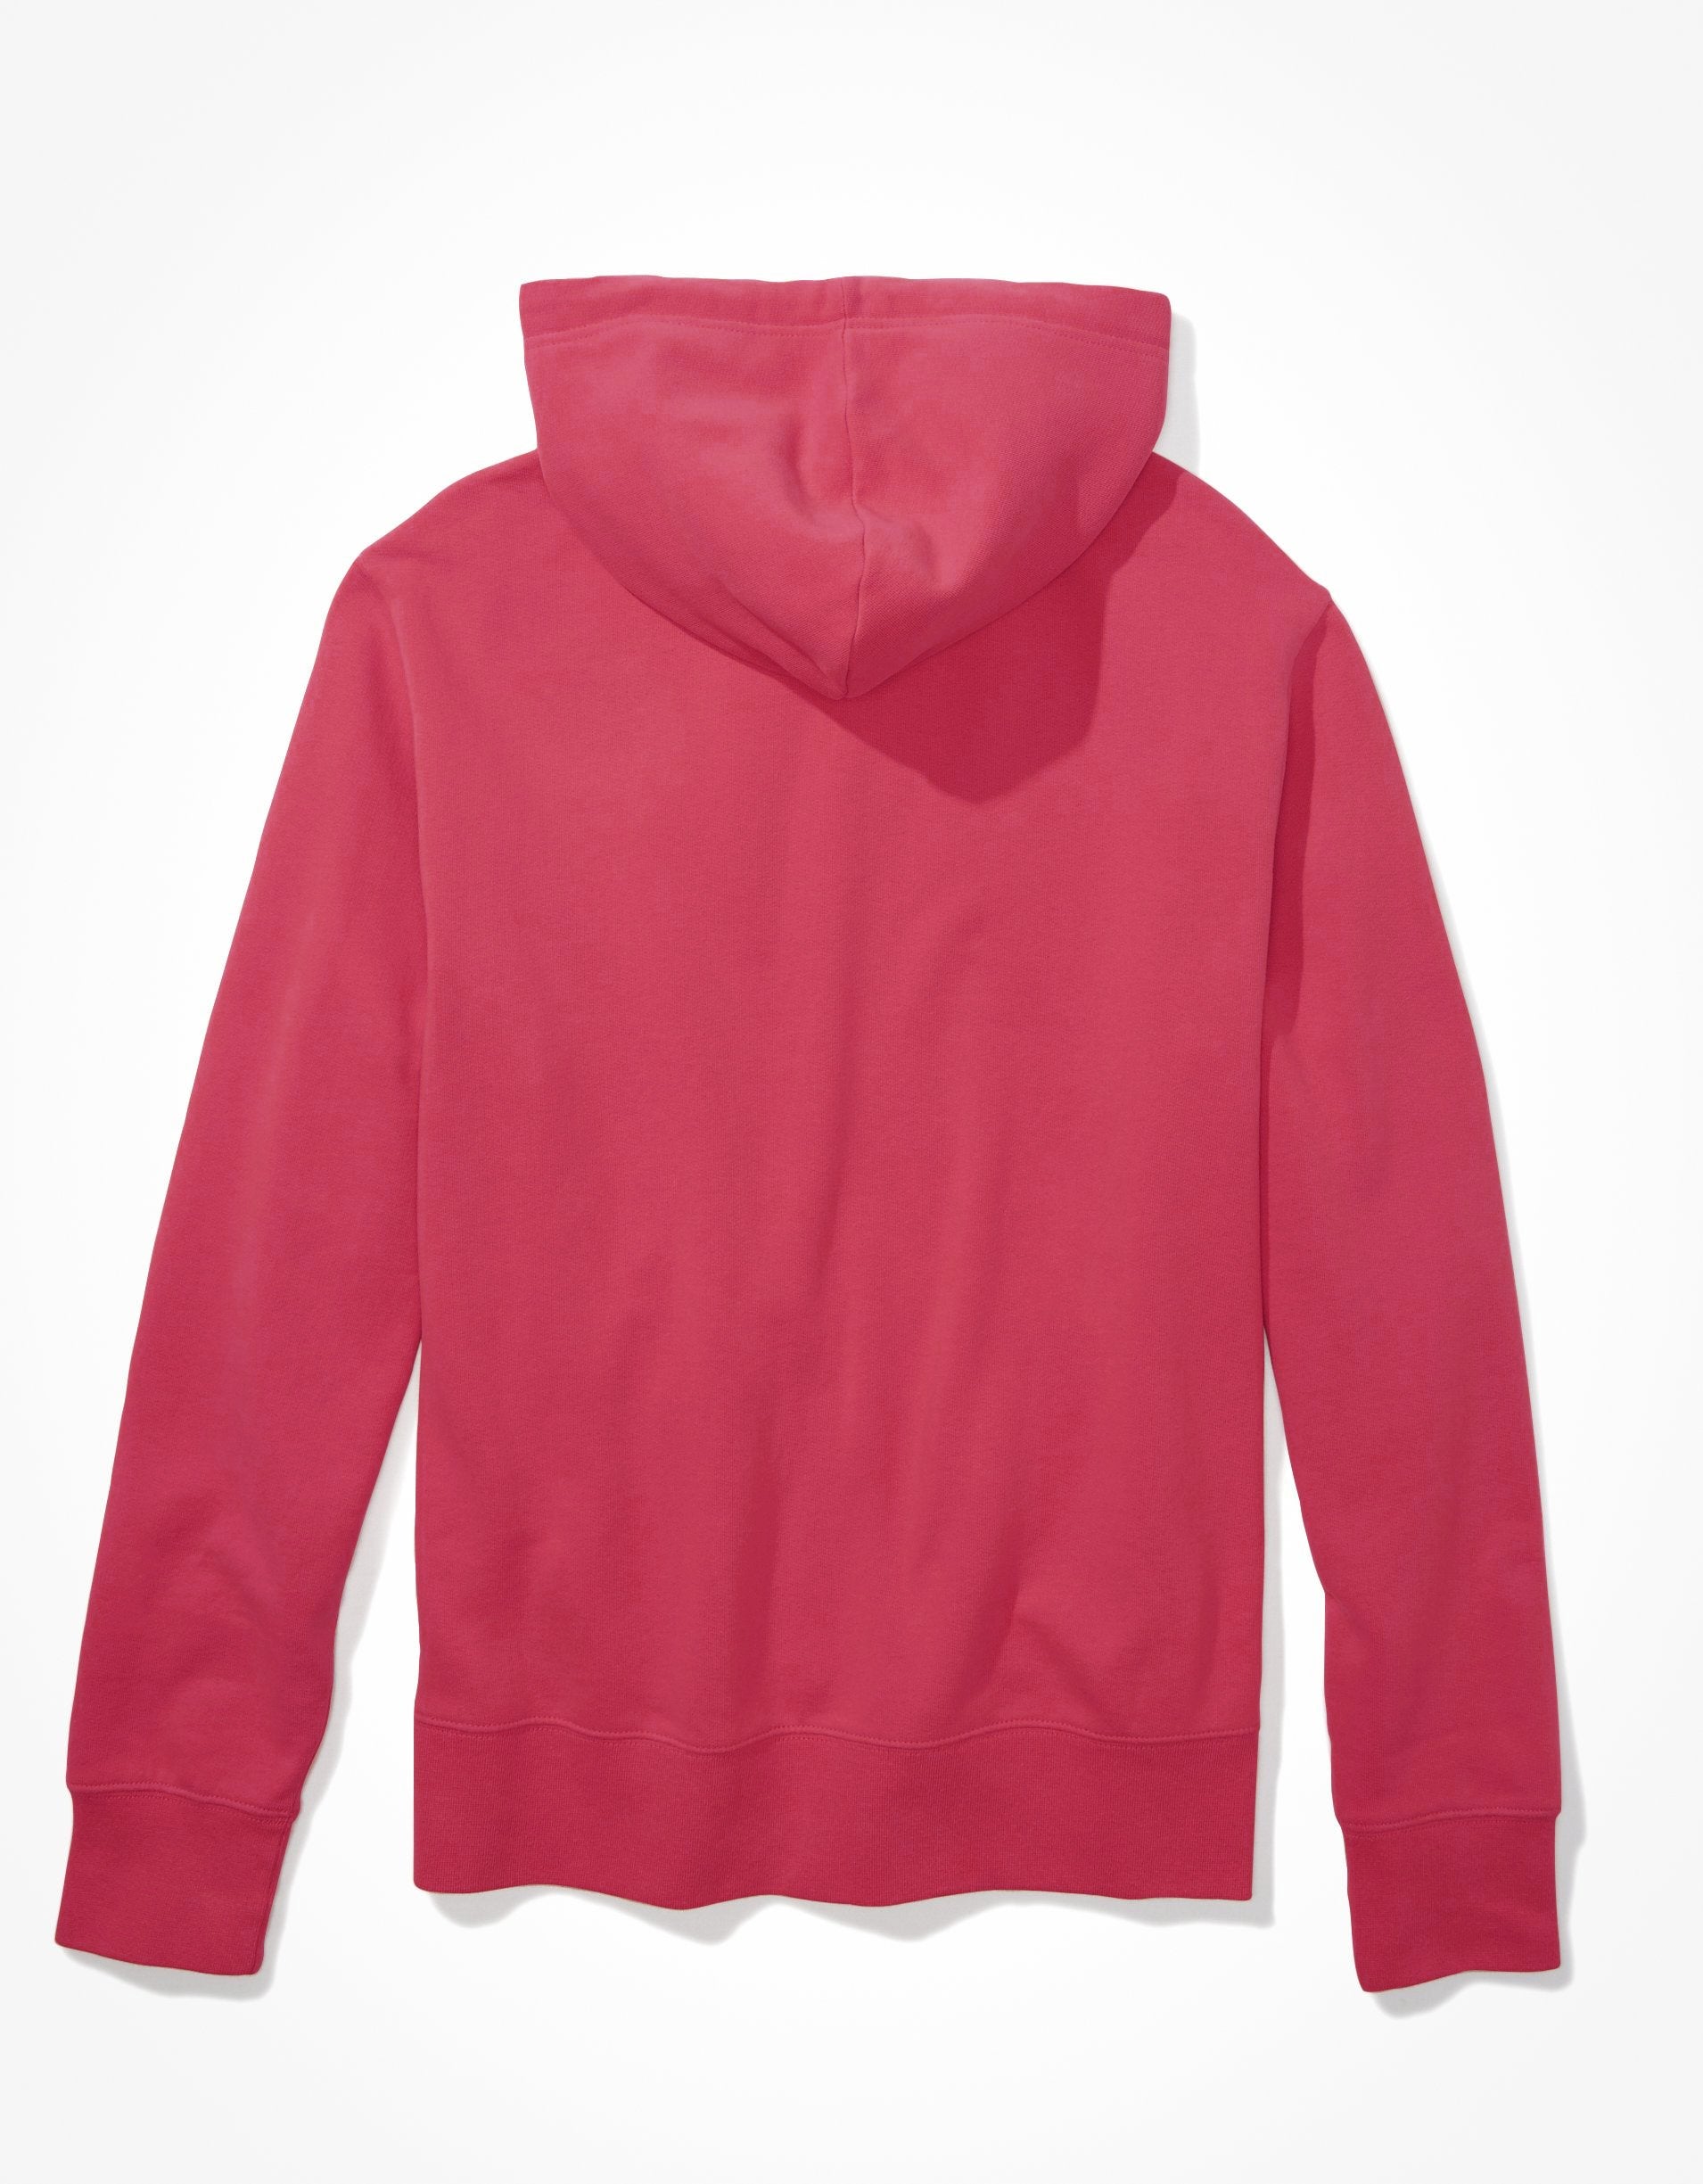 Next Fleece Pullover Hoodie For Men-Pink with Black Panel-BE188